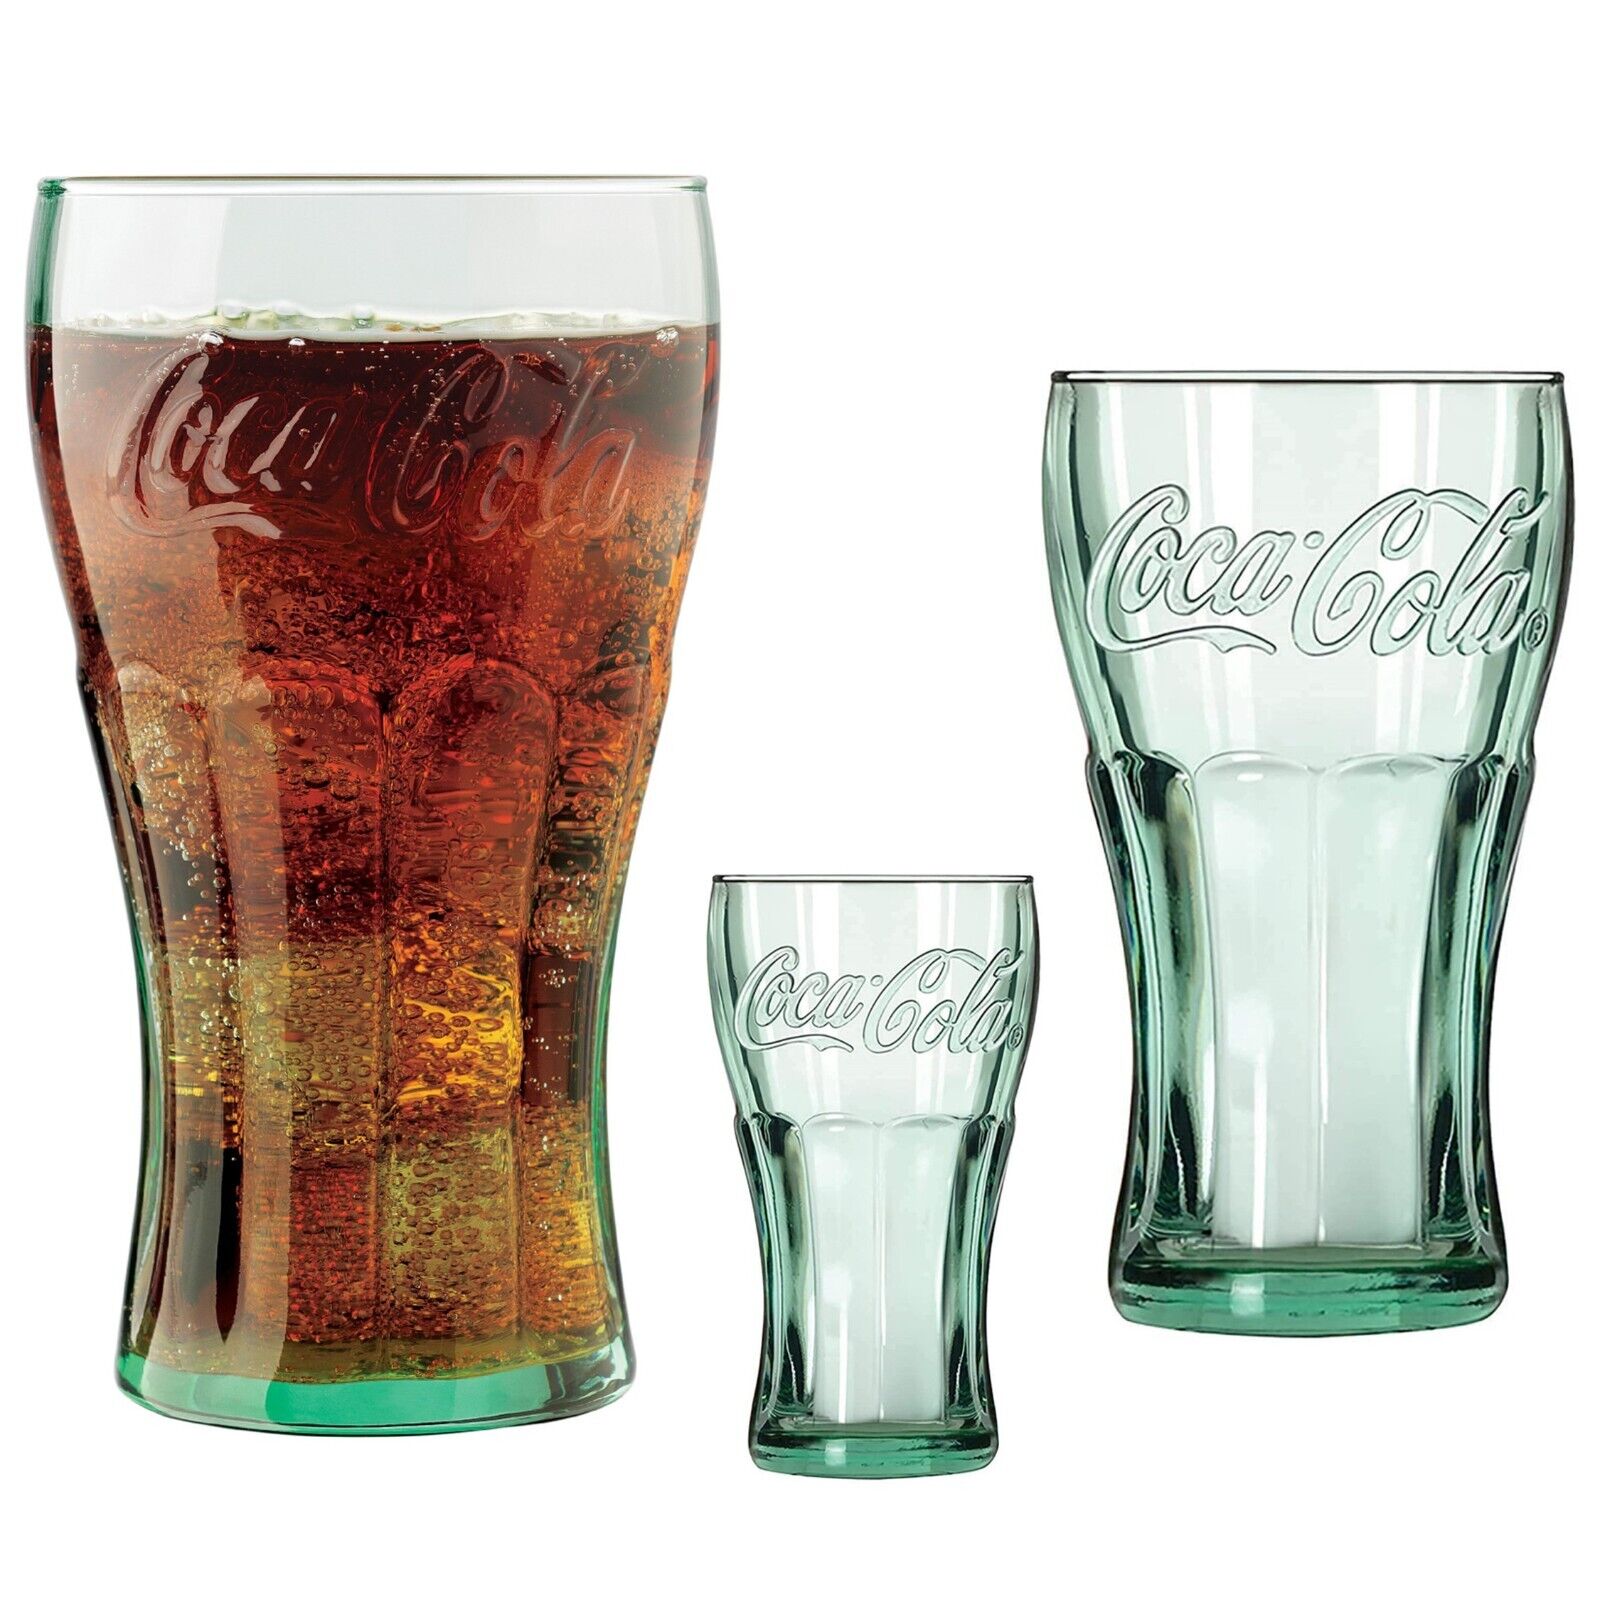 LIBBEY COCA-COLA DRINKING GLASS COLLECTORS TUMBLER SET GEORGIA GREEN MADE IN USA